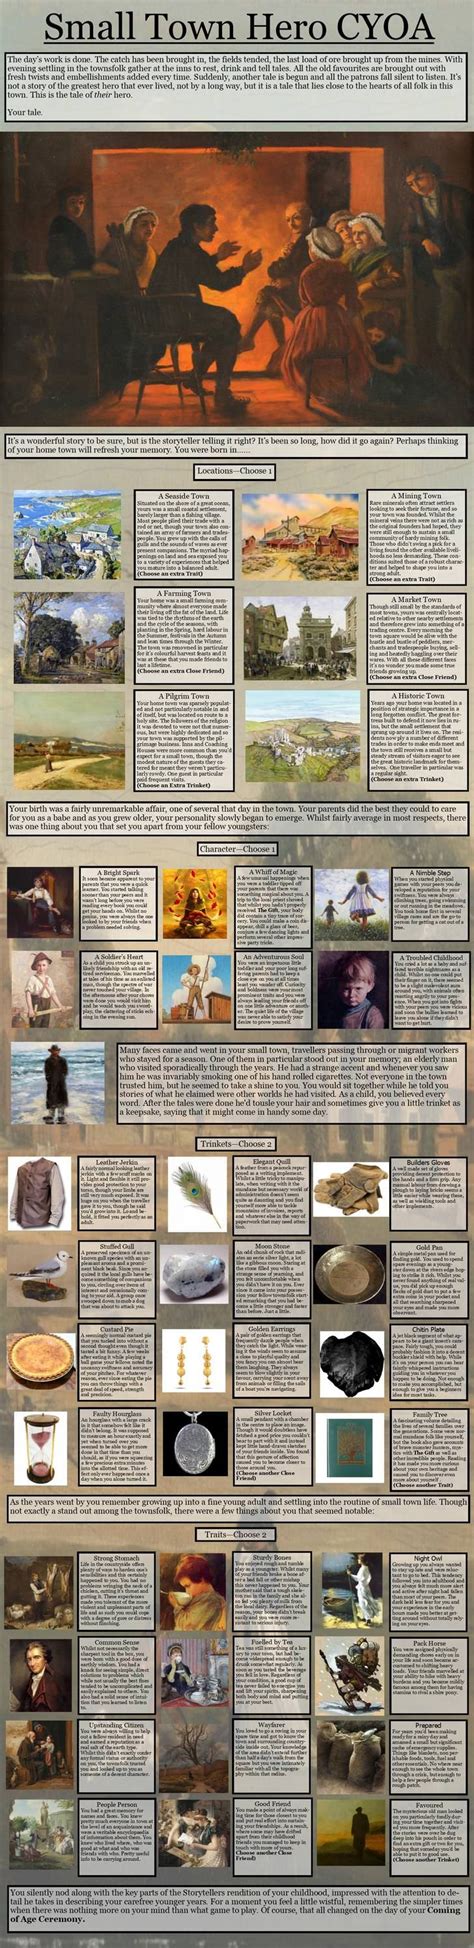 Small Town Hero Cyoa By Scottishanon And New Observer Imgur Cyoa